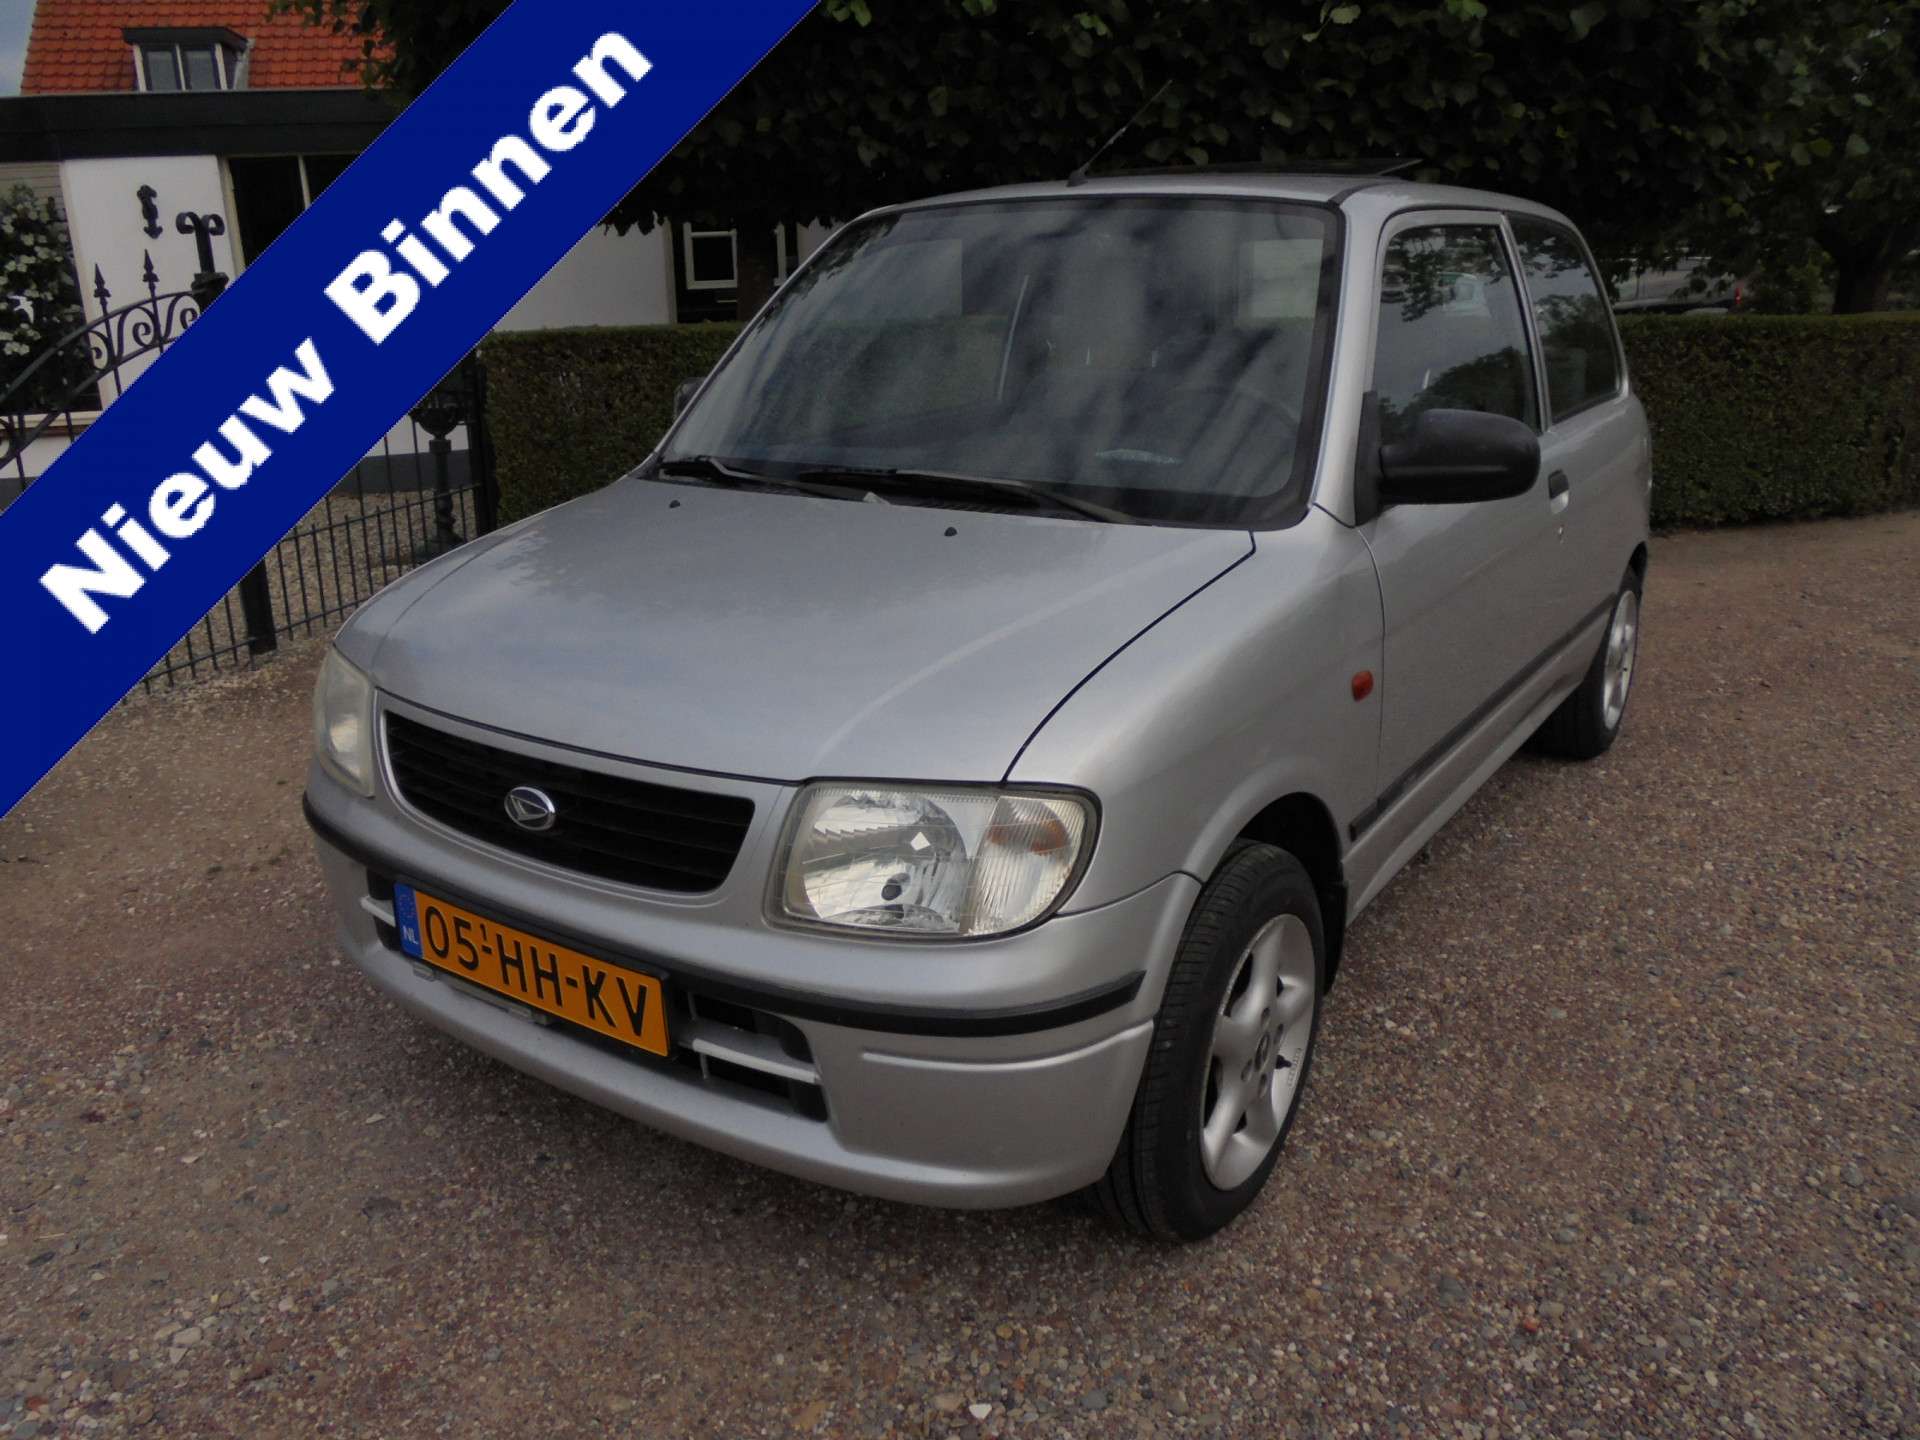 Daihatsu Cuore Compact in Silver used in COTHEN for € 1,499.-